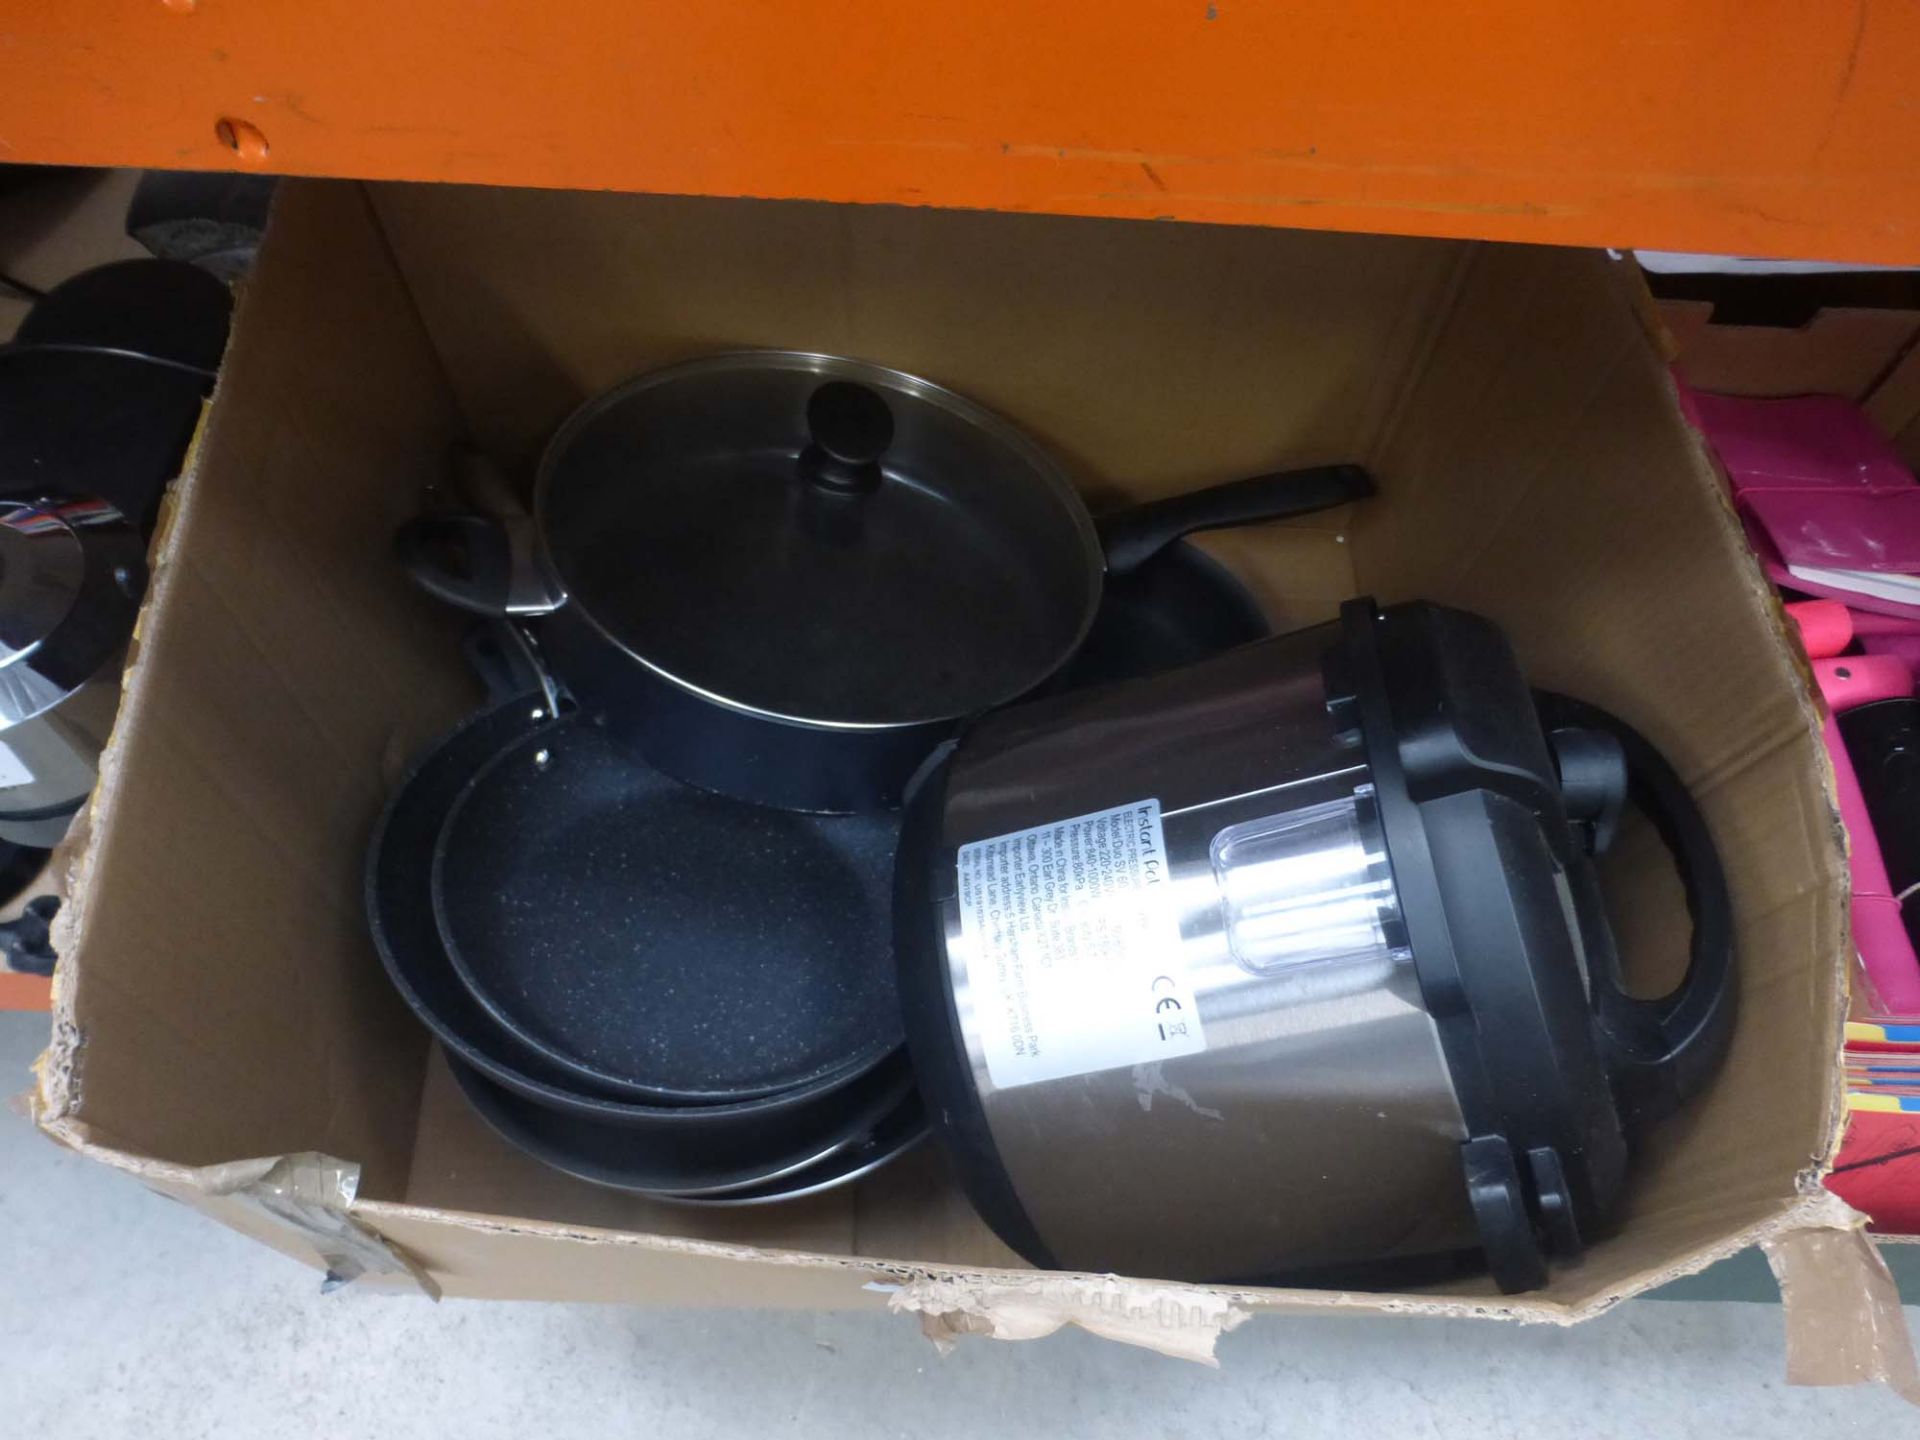 Box containing used pots and pans, and instant pot